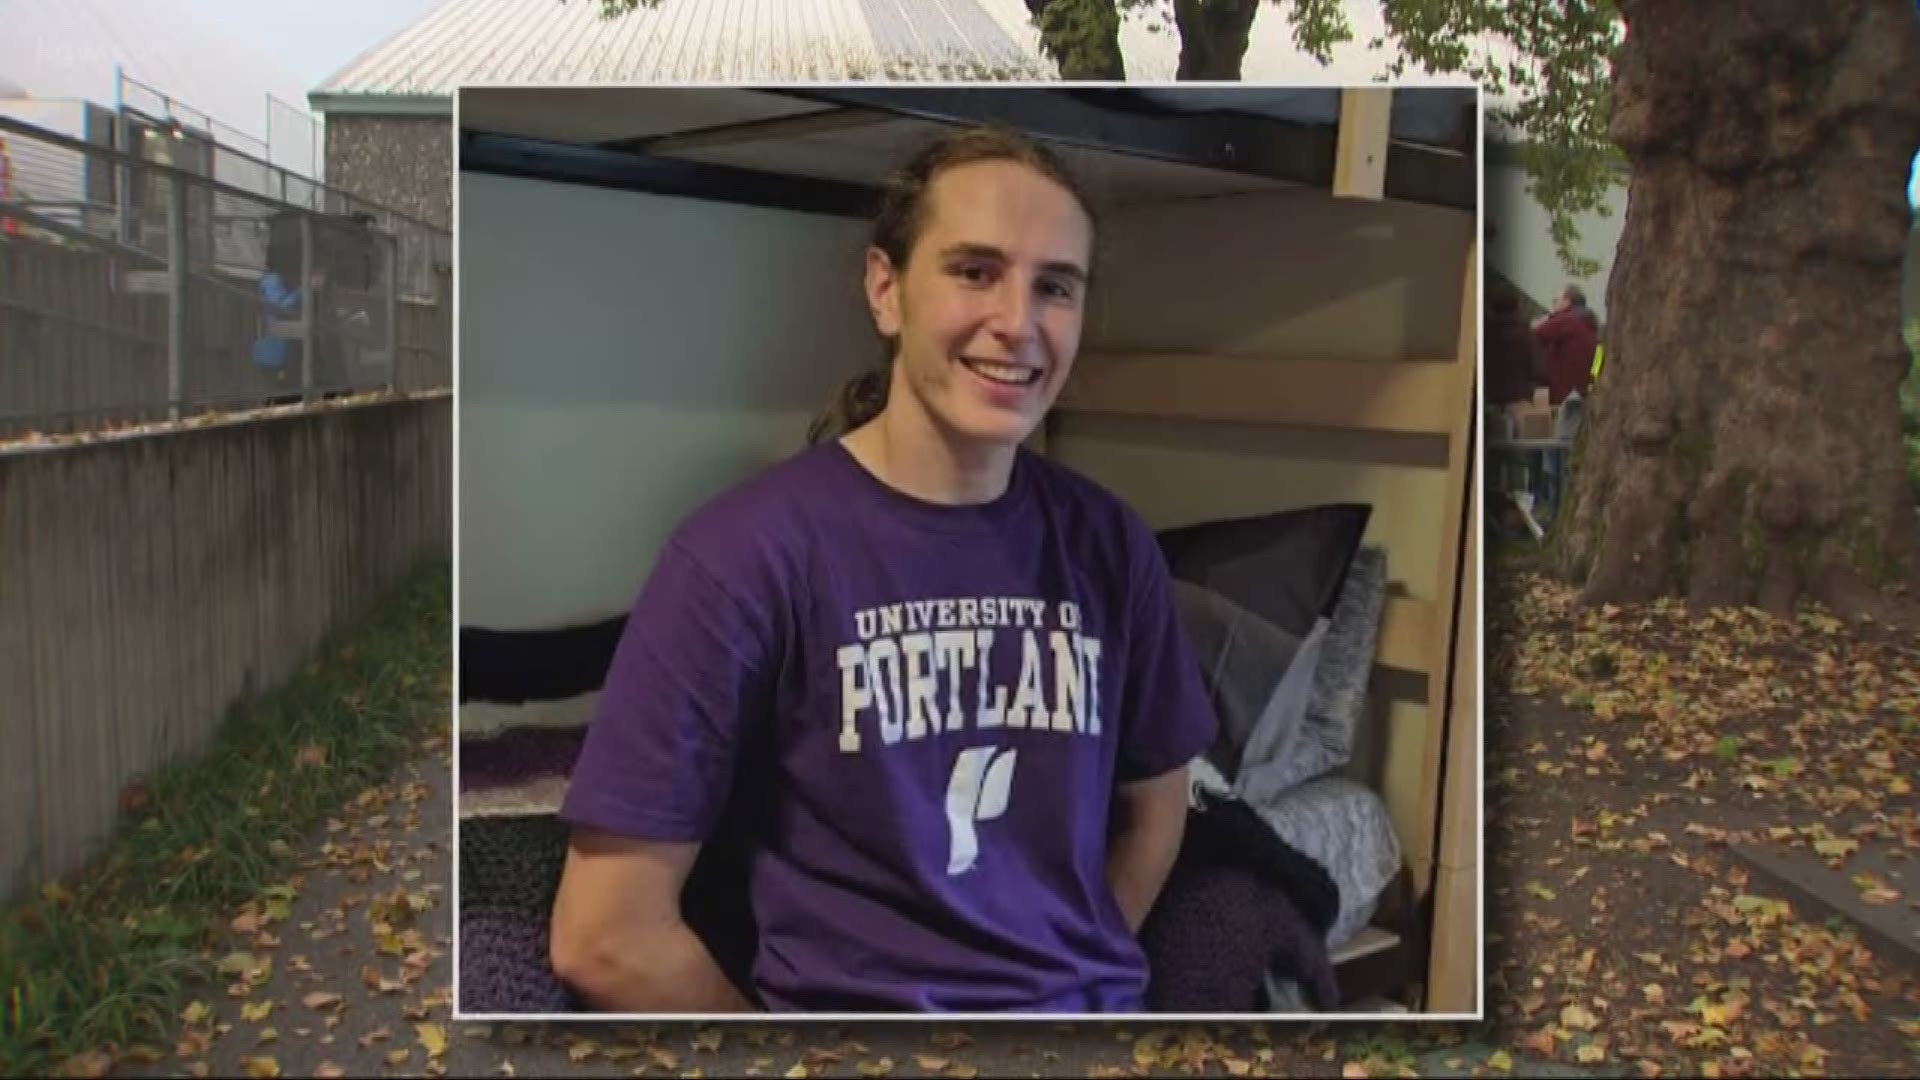 The parents of missing University of Portland student Owen Klinger believe a body found in the Willamette River is their son. The body was found Sunday, Oct. 20.